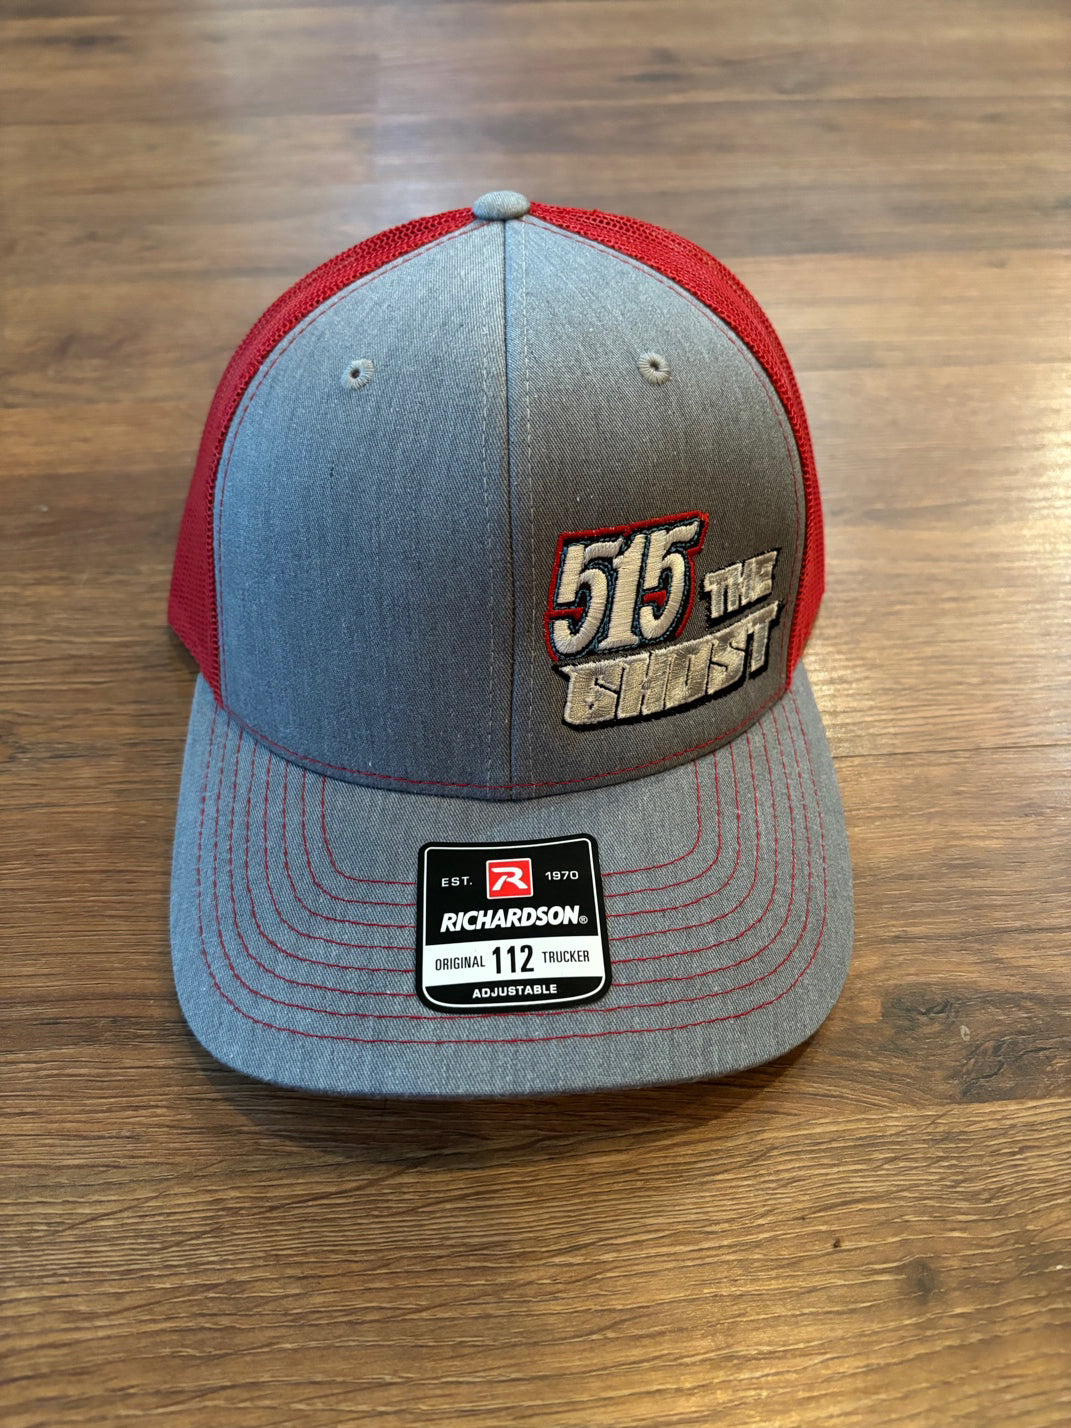 Gray / Red Mesh 515 The Ghost Richardson 112 Snapback Hat